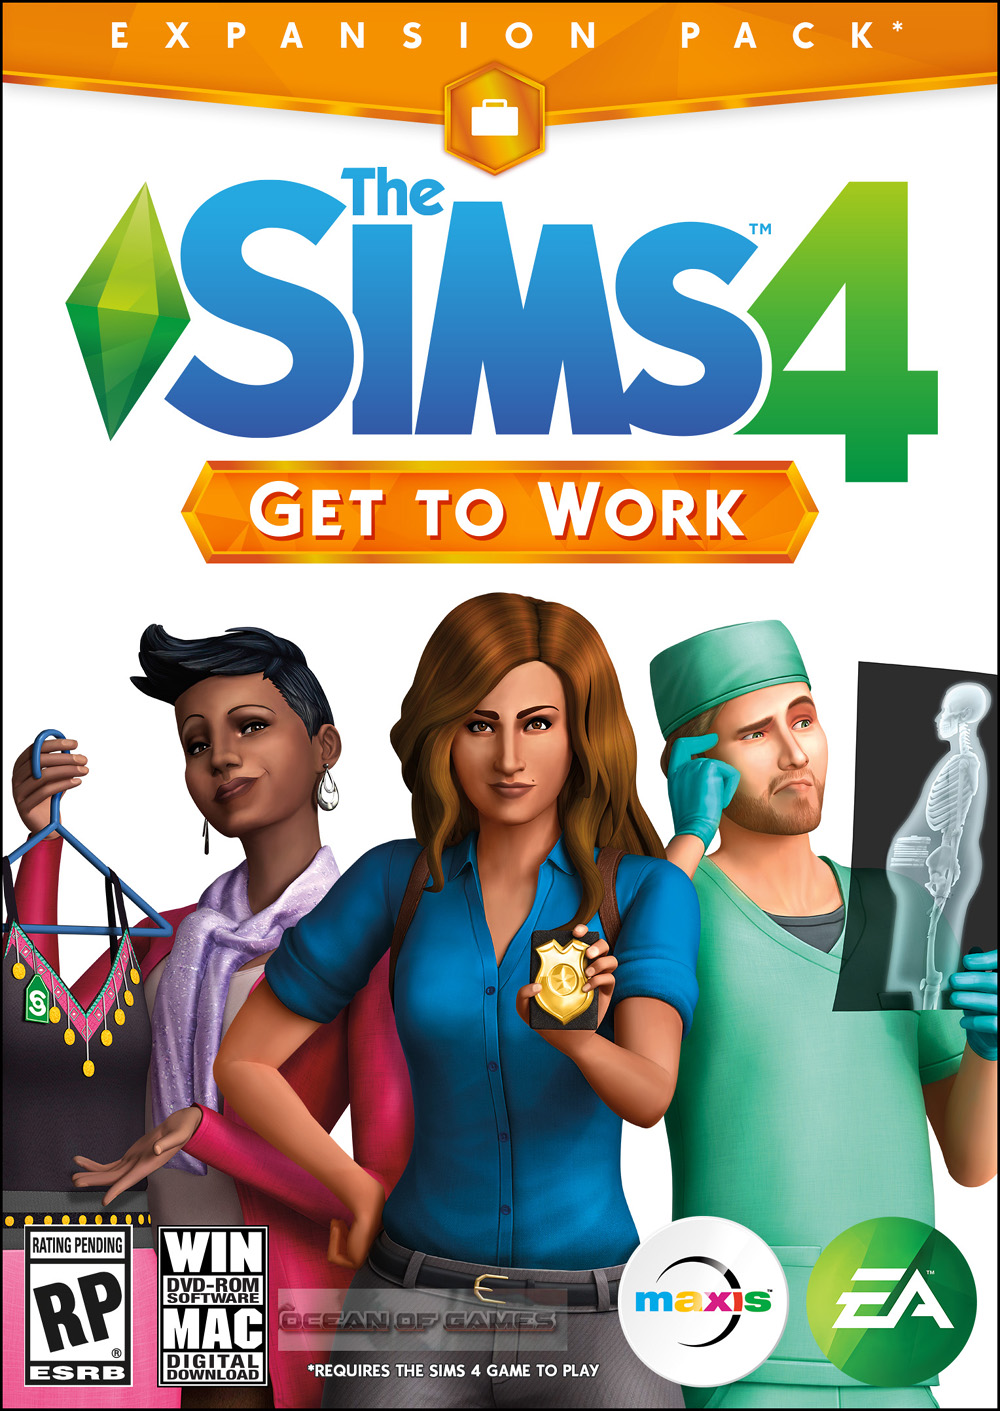 The sims 4 free download angular 10 download